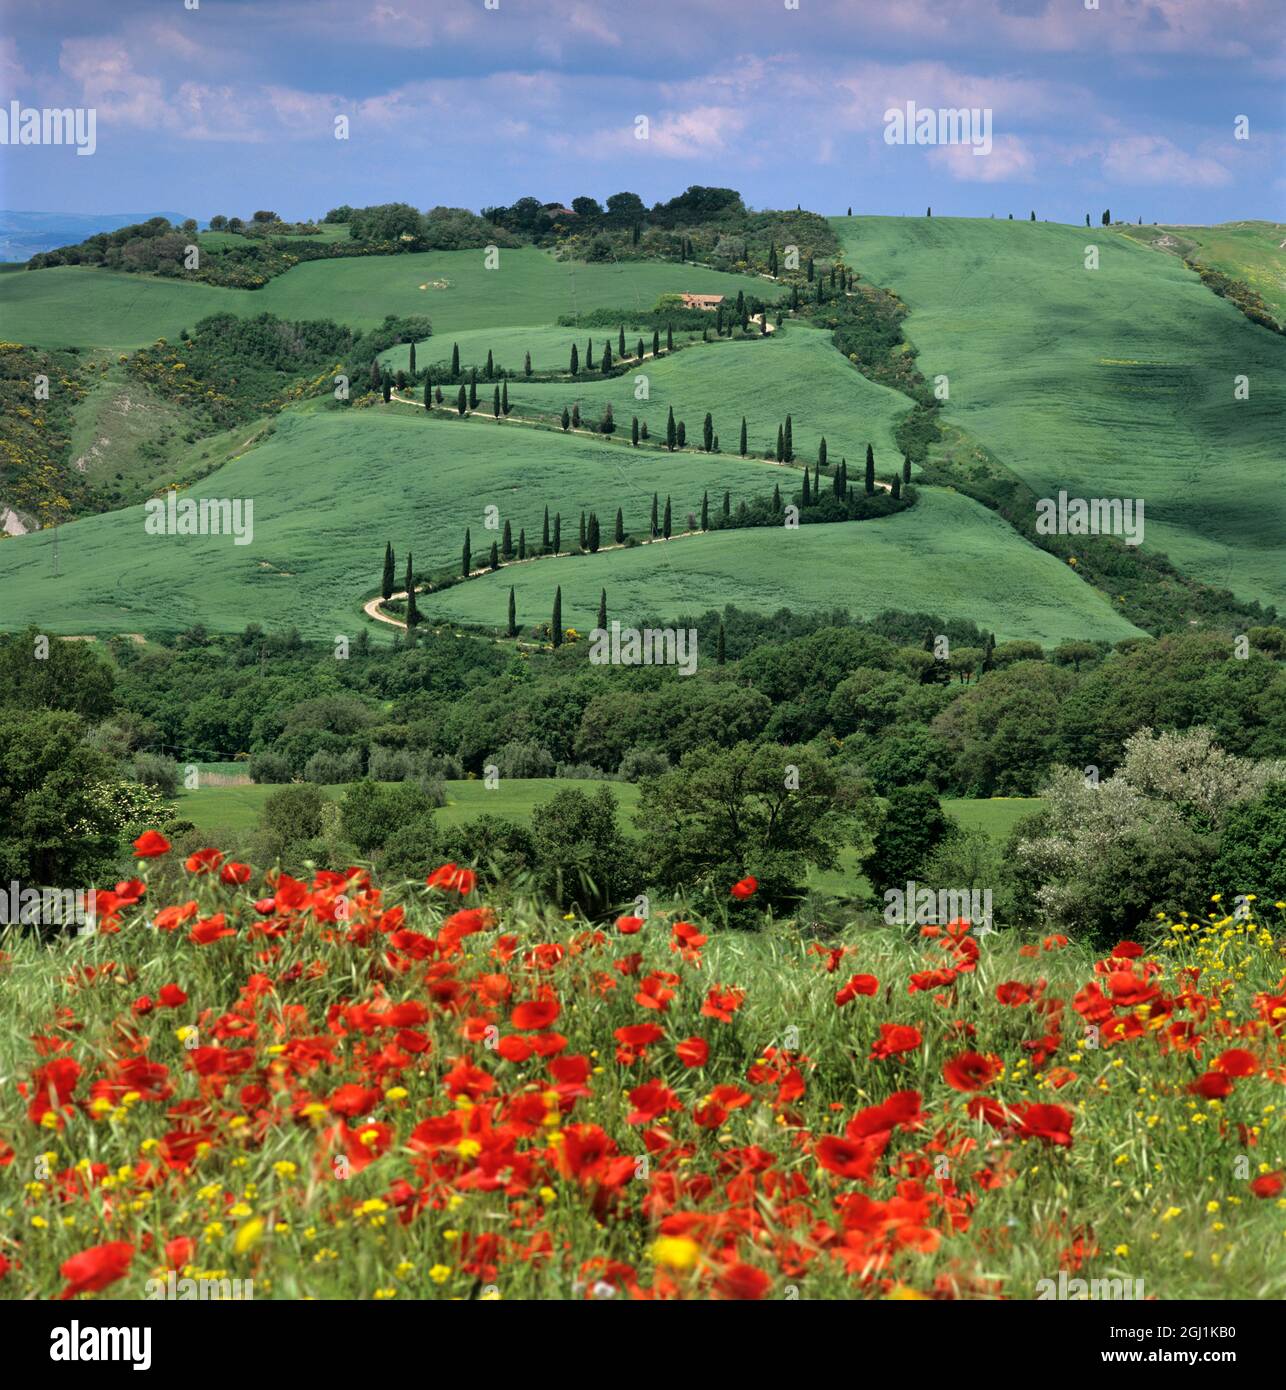 Red poppies below winding Tuscan lane lined with cypress trees, La Foce, near Montepulciano, Siena Province, Tuscany, Italy, Europe Stock Photo